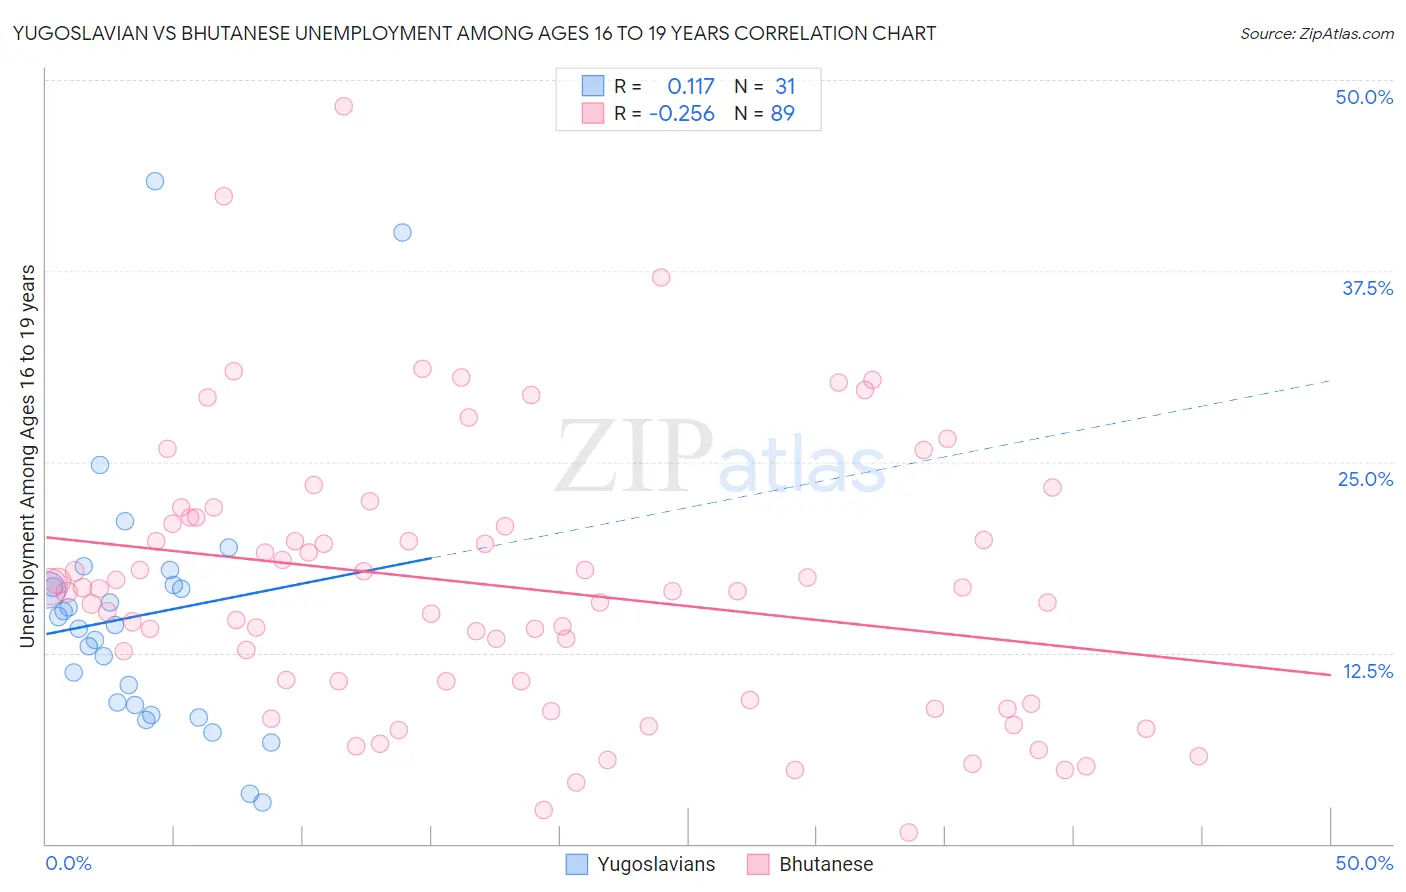 Yugoslavian vs Bhutanese Unemployment Among Ages 16 to 19 years